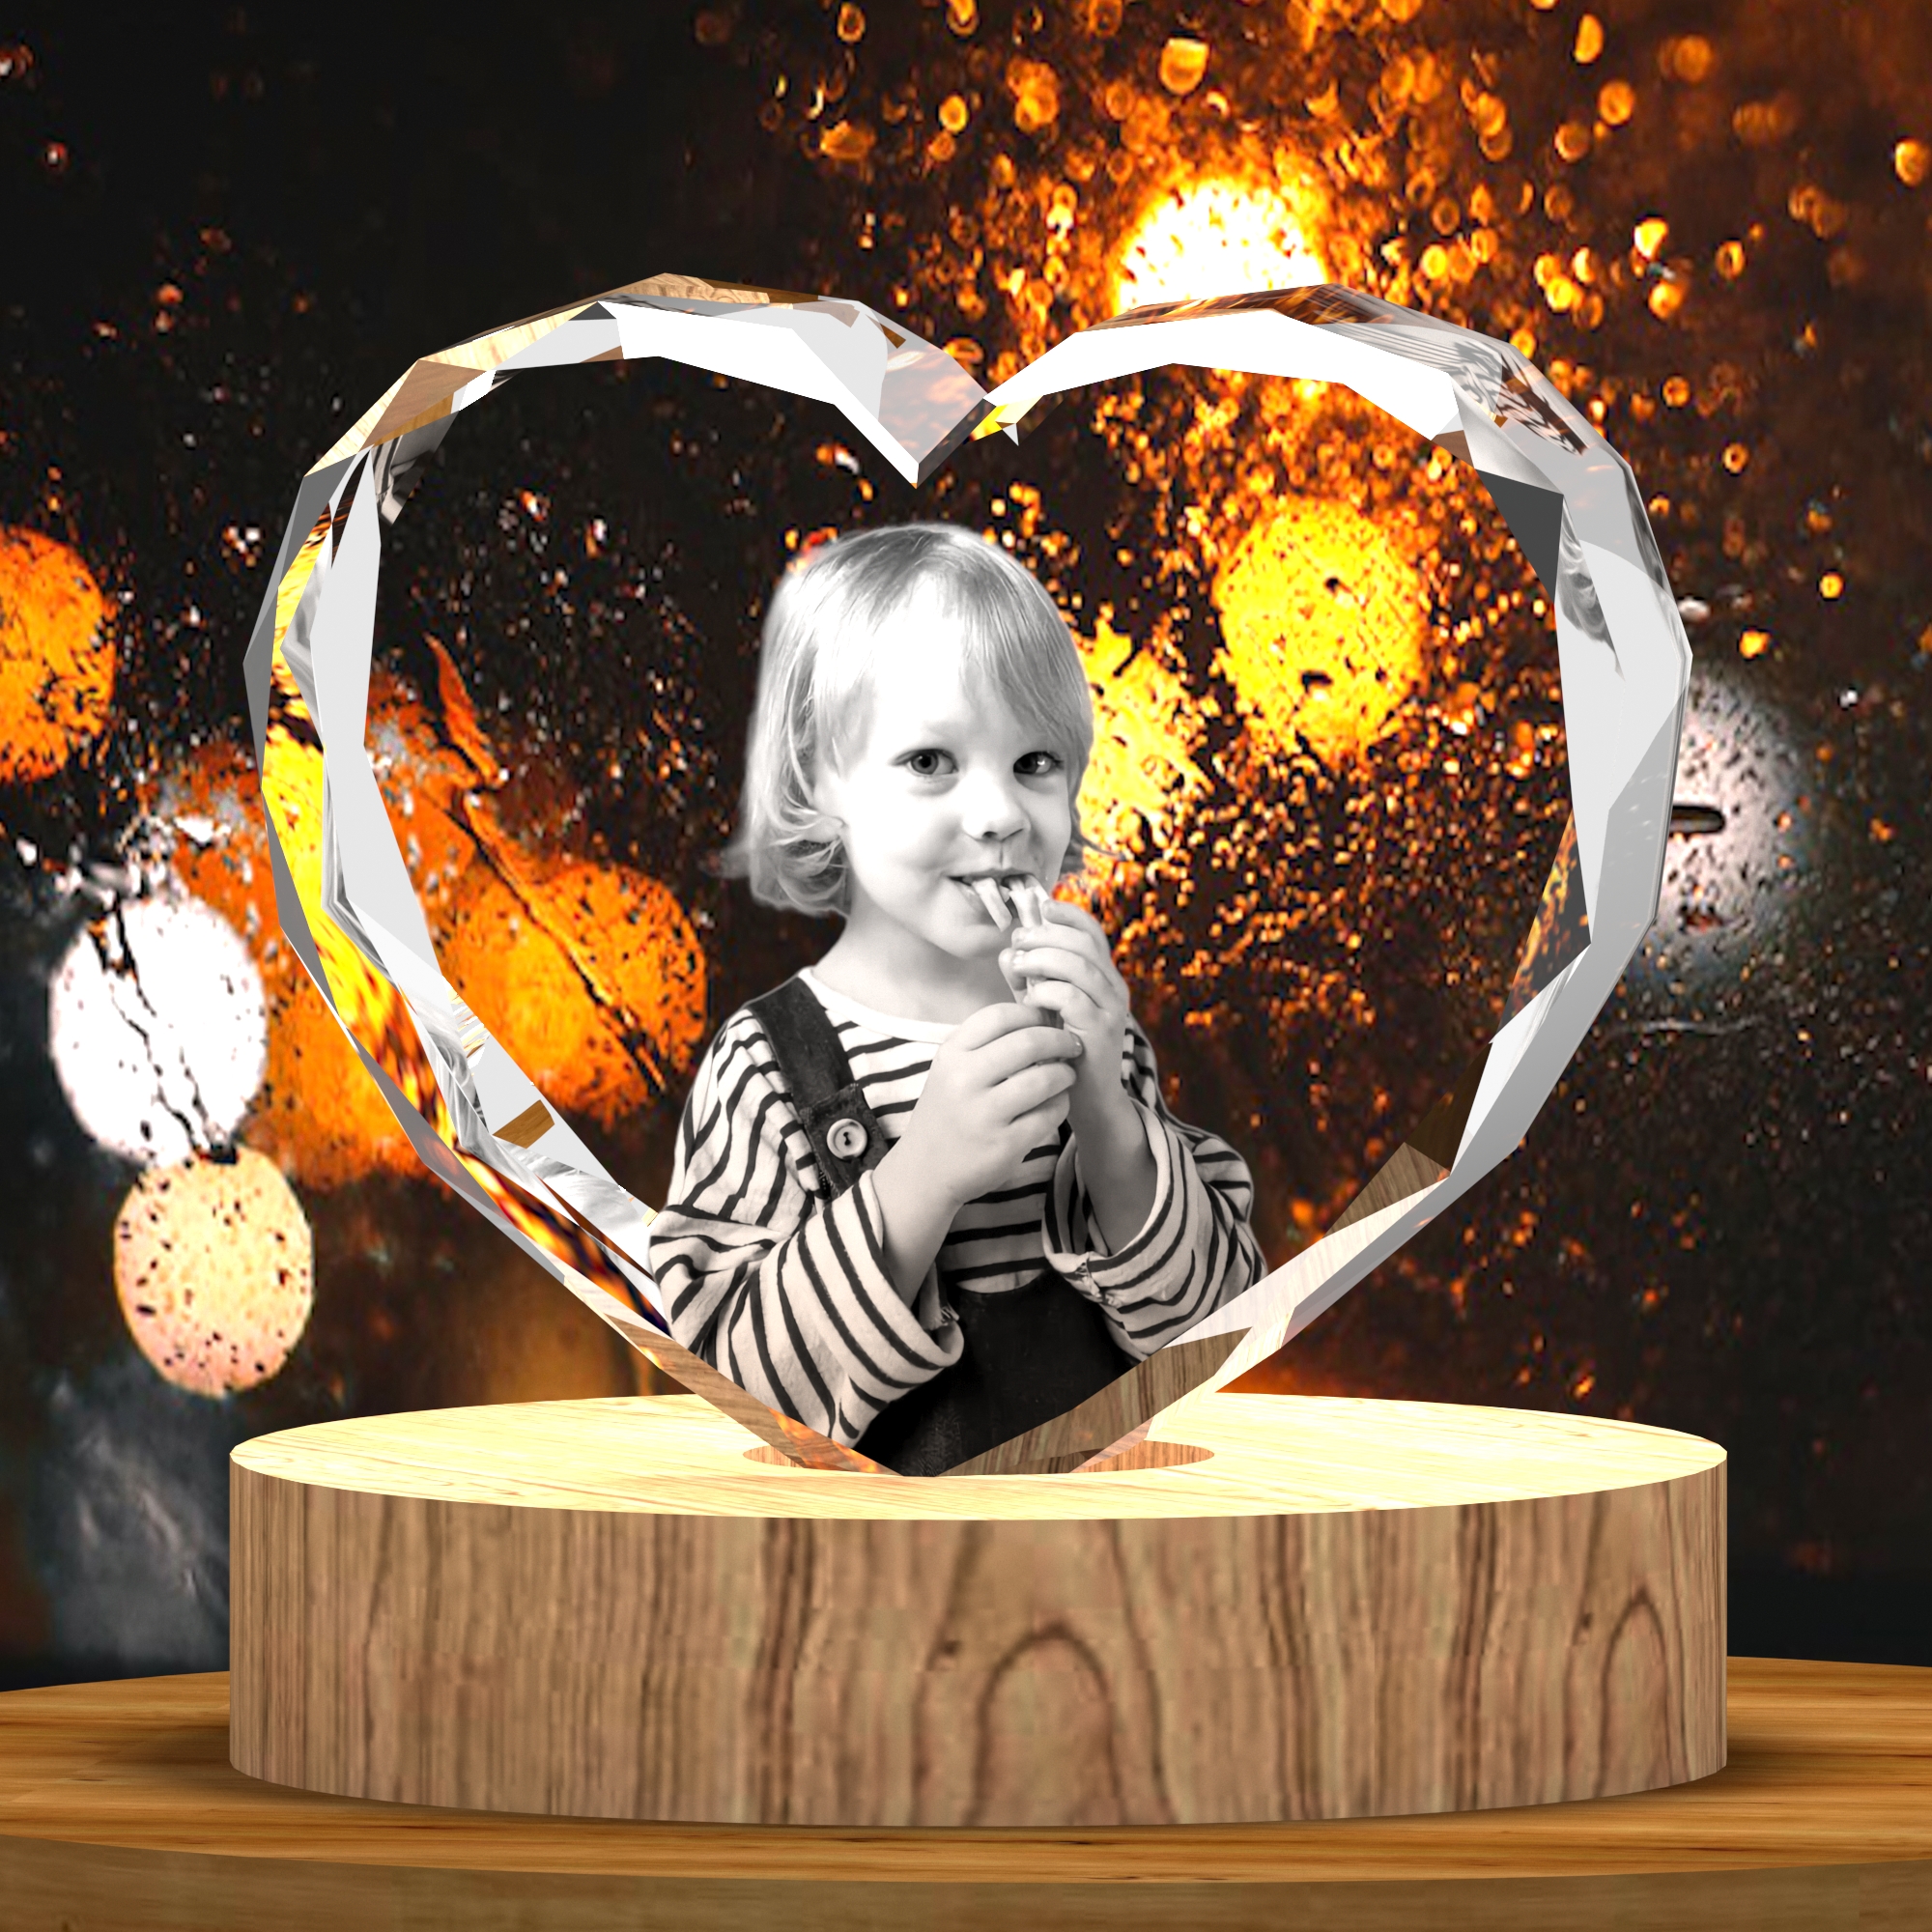 3D Crystal Photo, Engraved Heart Crystal Personalized Gifts for Mom Dad Customized Heart Photo Crystal for Kids Birthday Gifts Mothers Day Gifts for Wedding Christmas Fathers Day